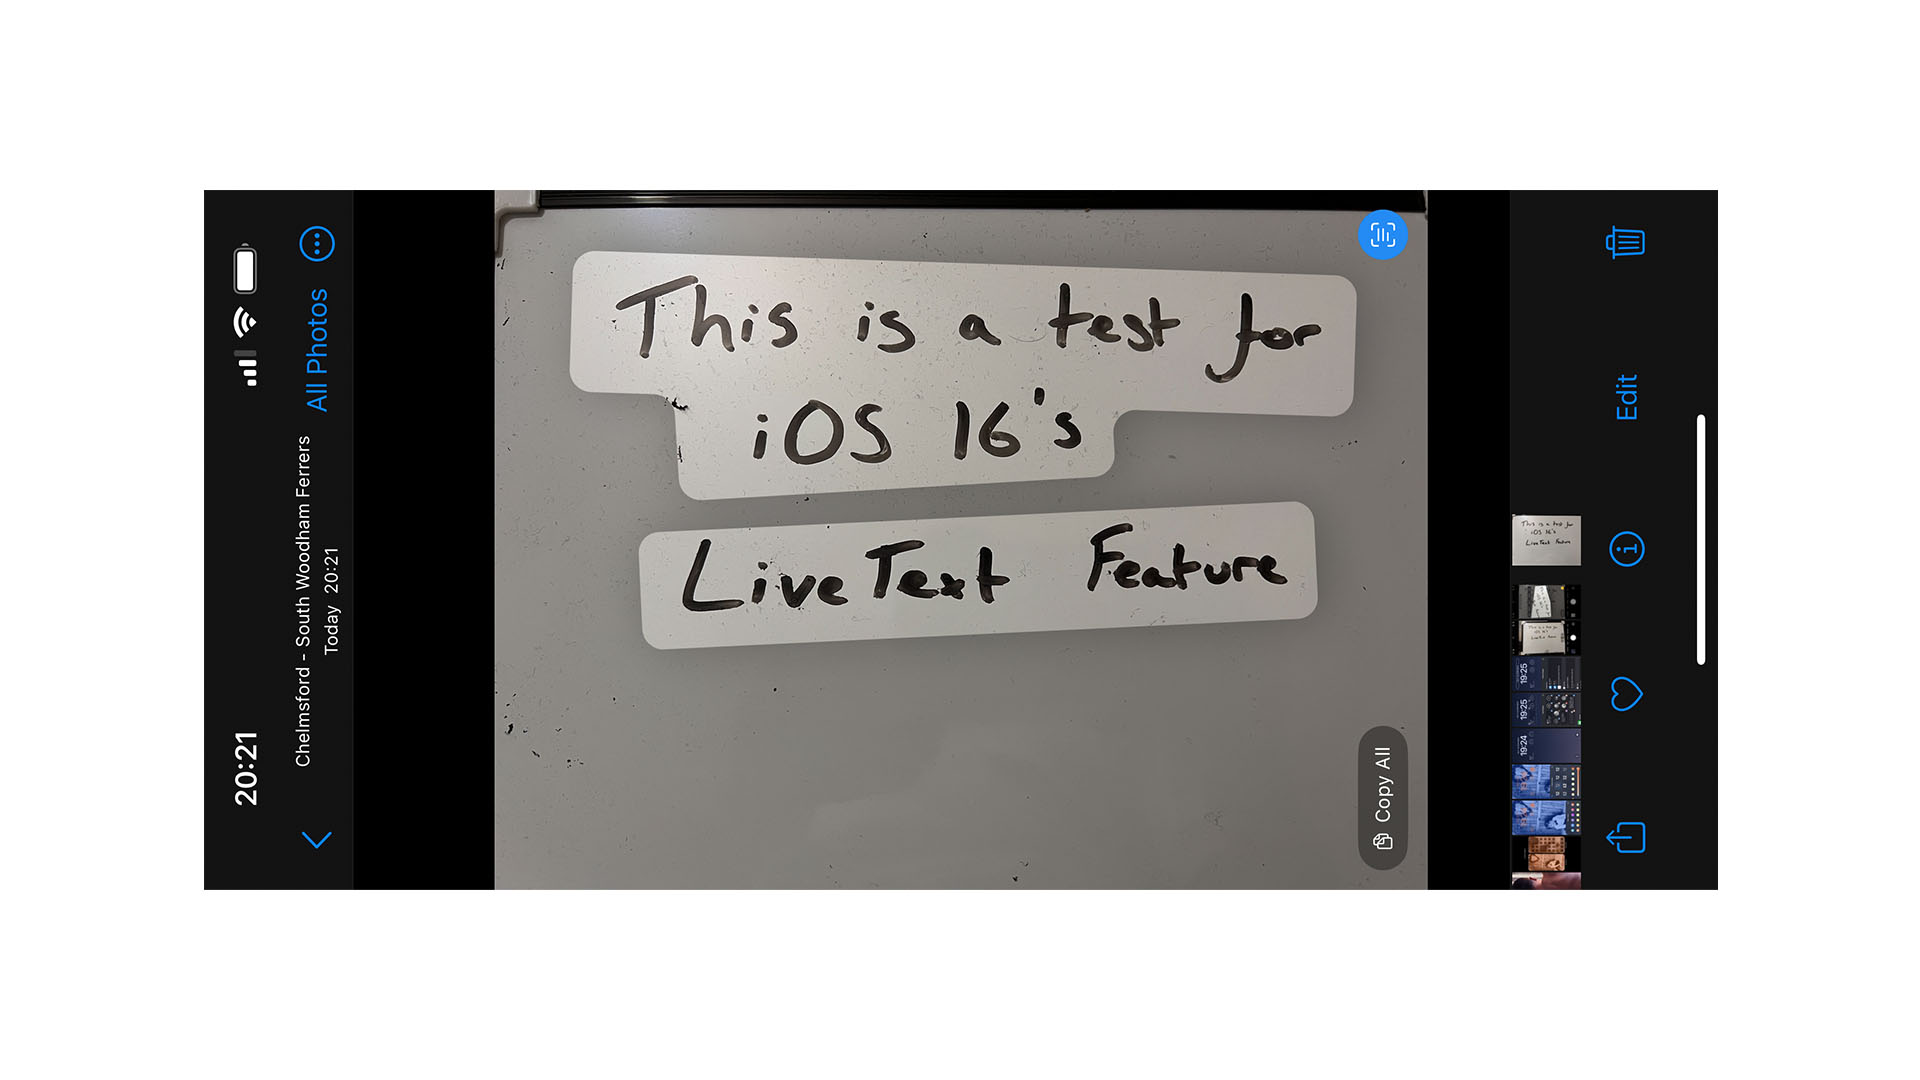 Live text in iOS 16